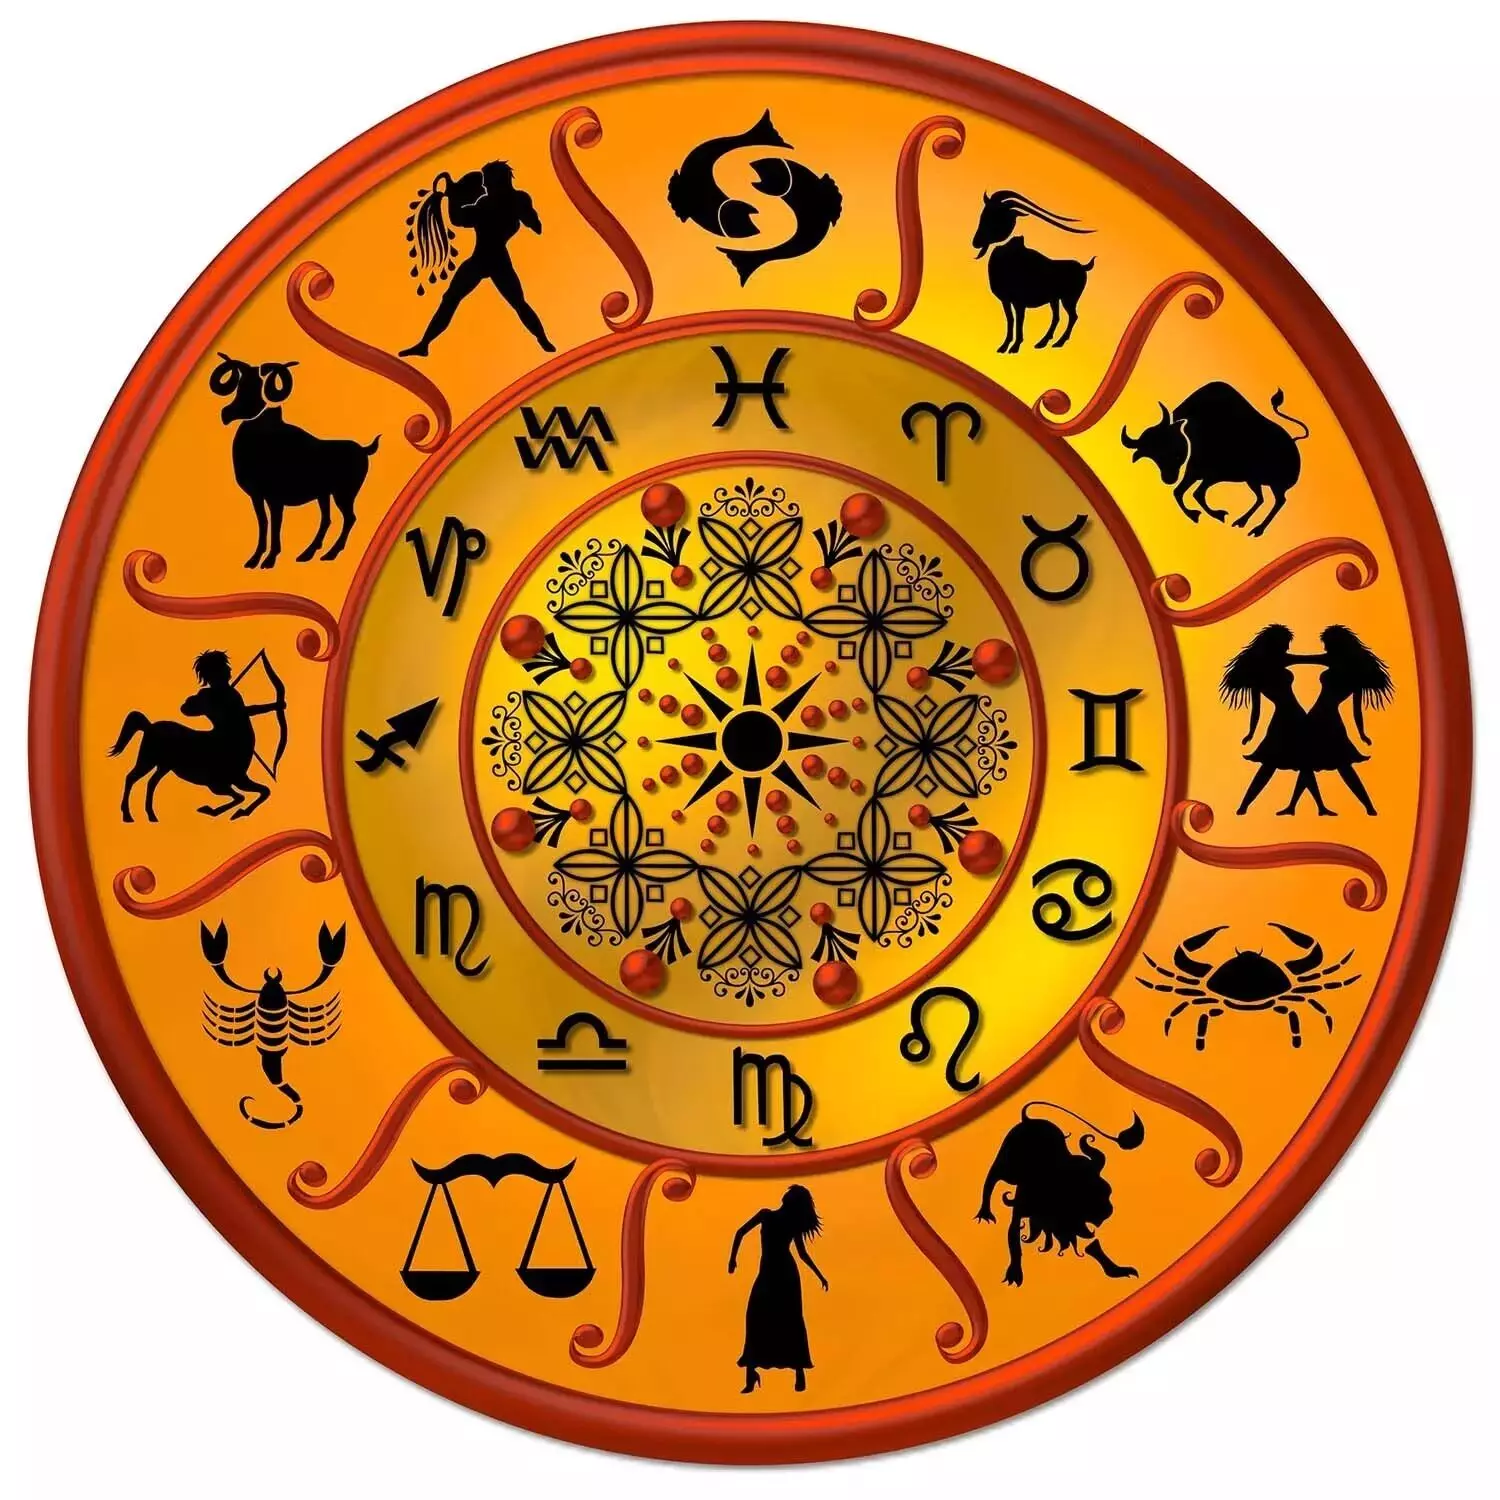 06  October  – Know your todays horoscope